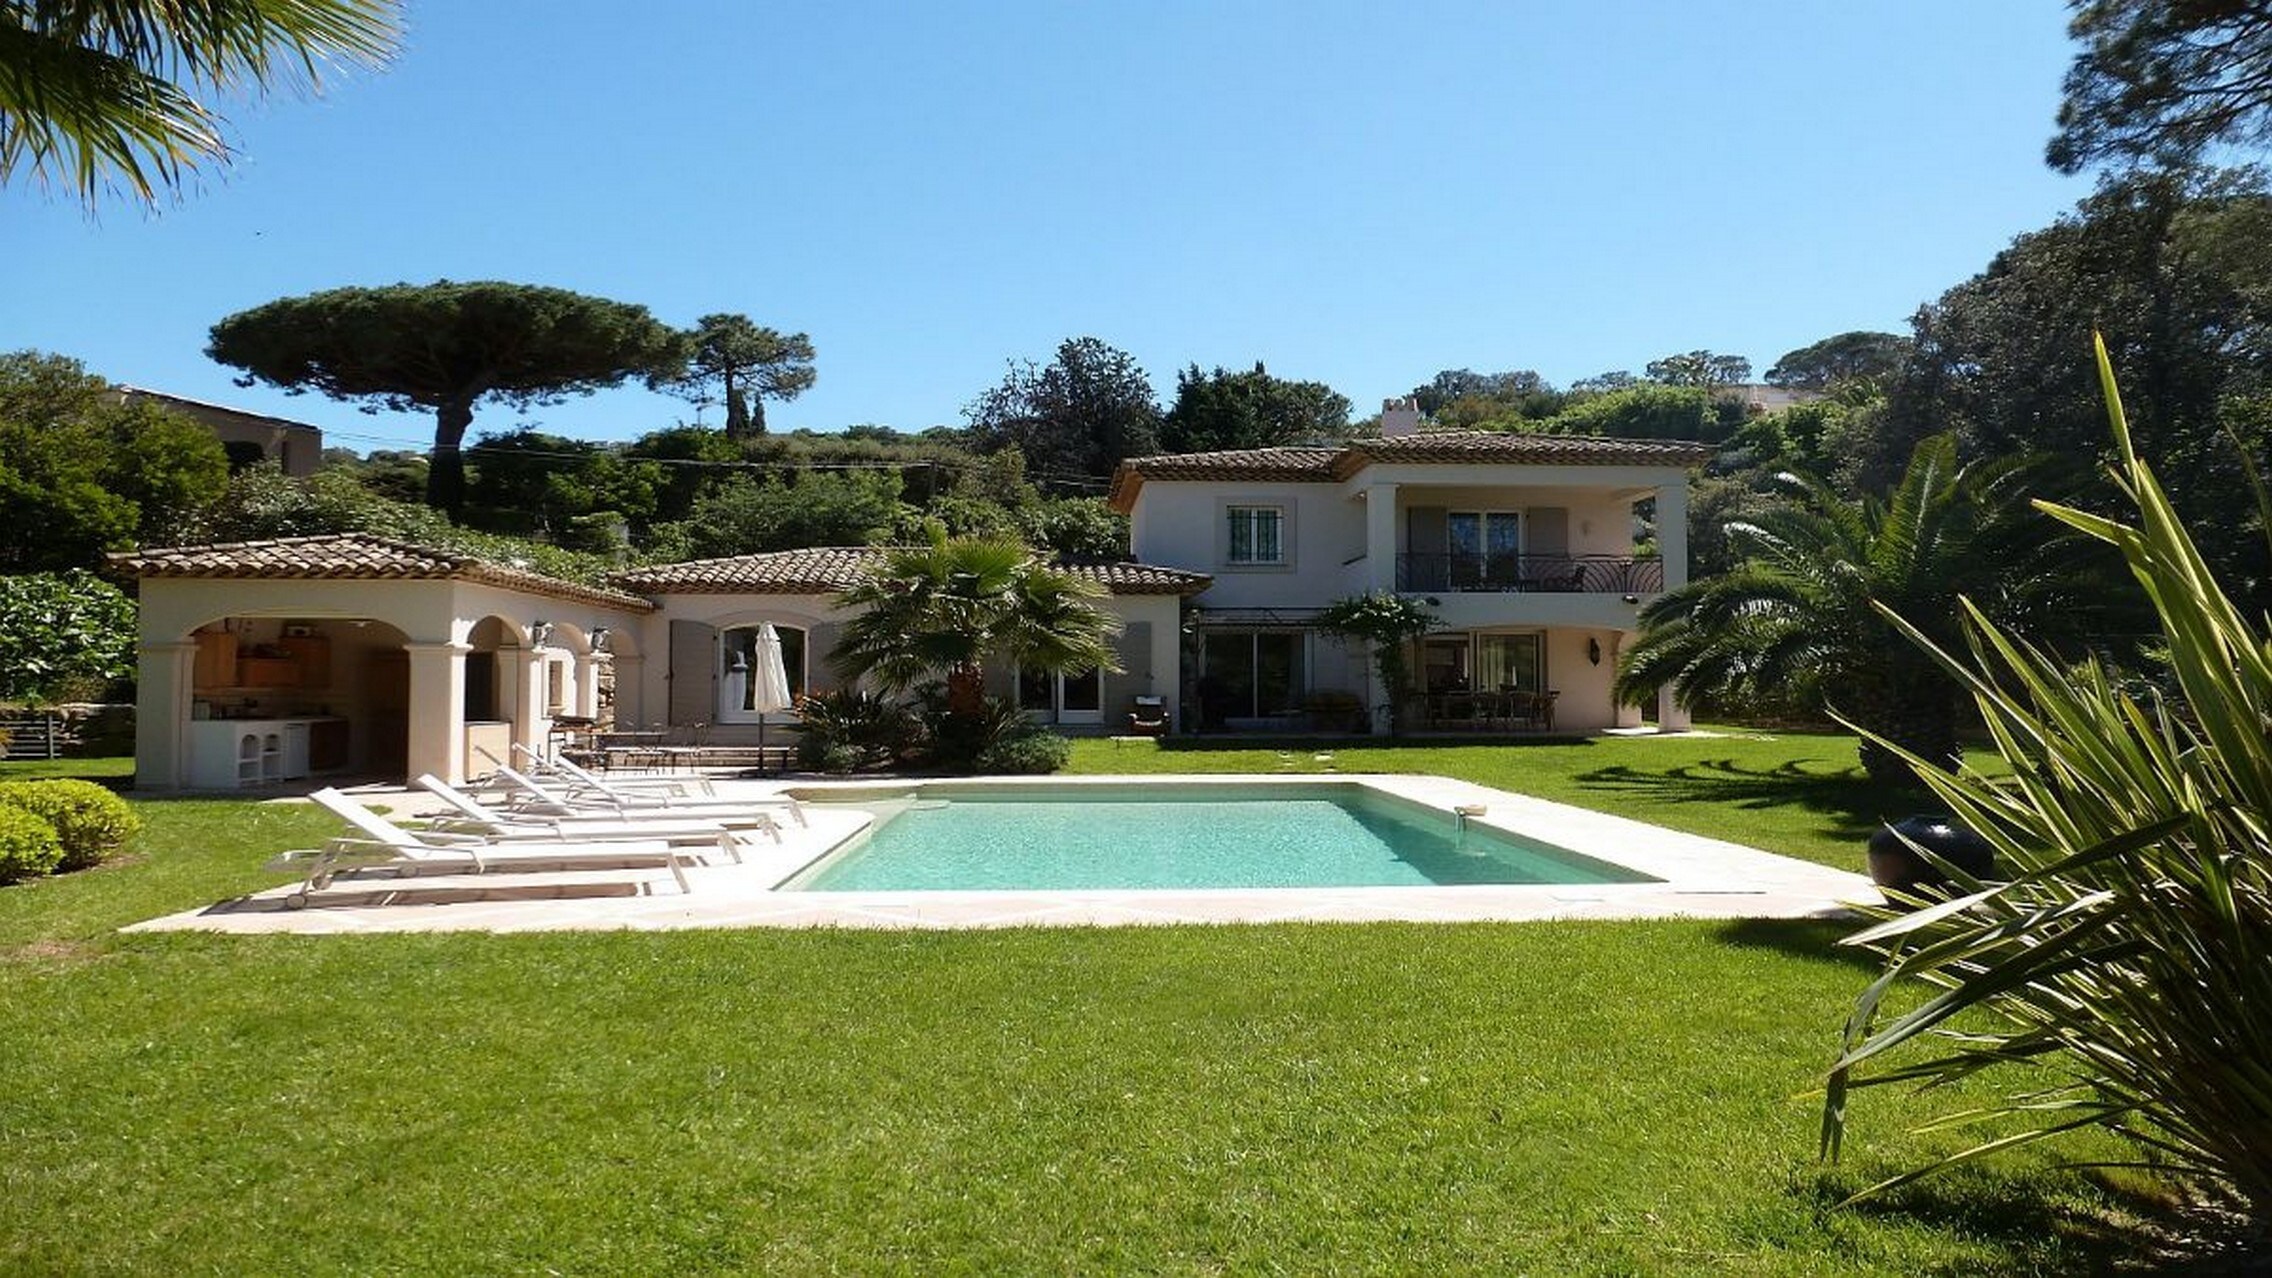 Property Image 2 - Fabulous 4 bedroom family villa with pool in Saint Tropez